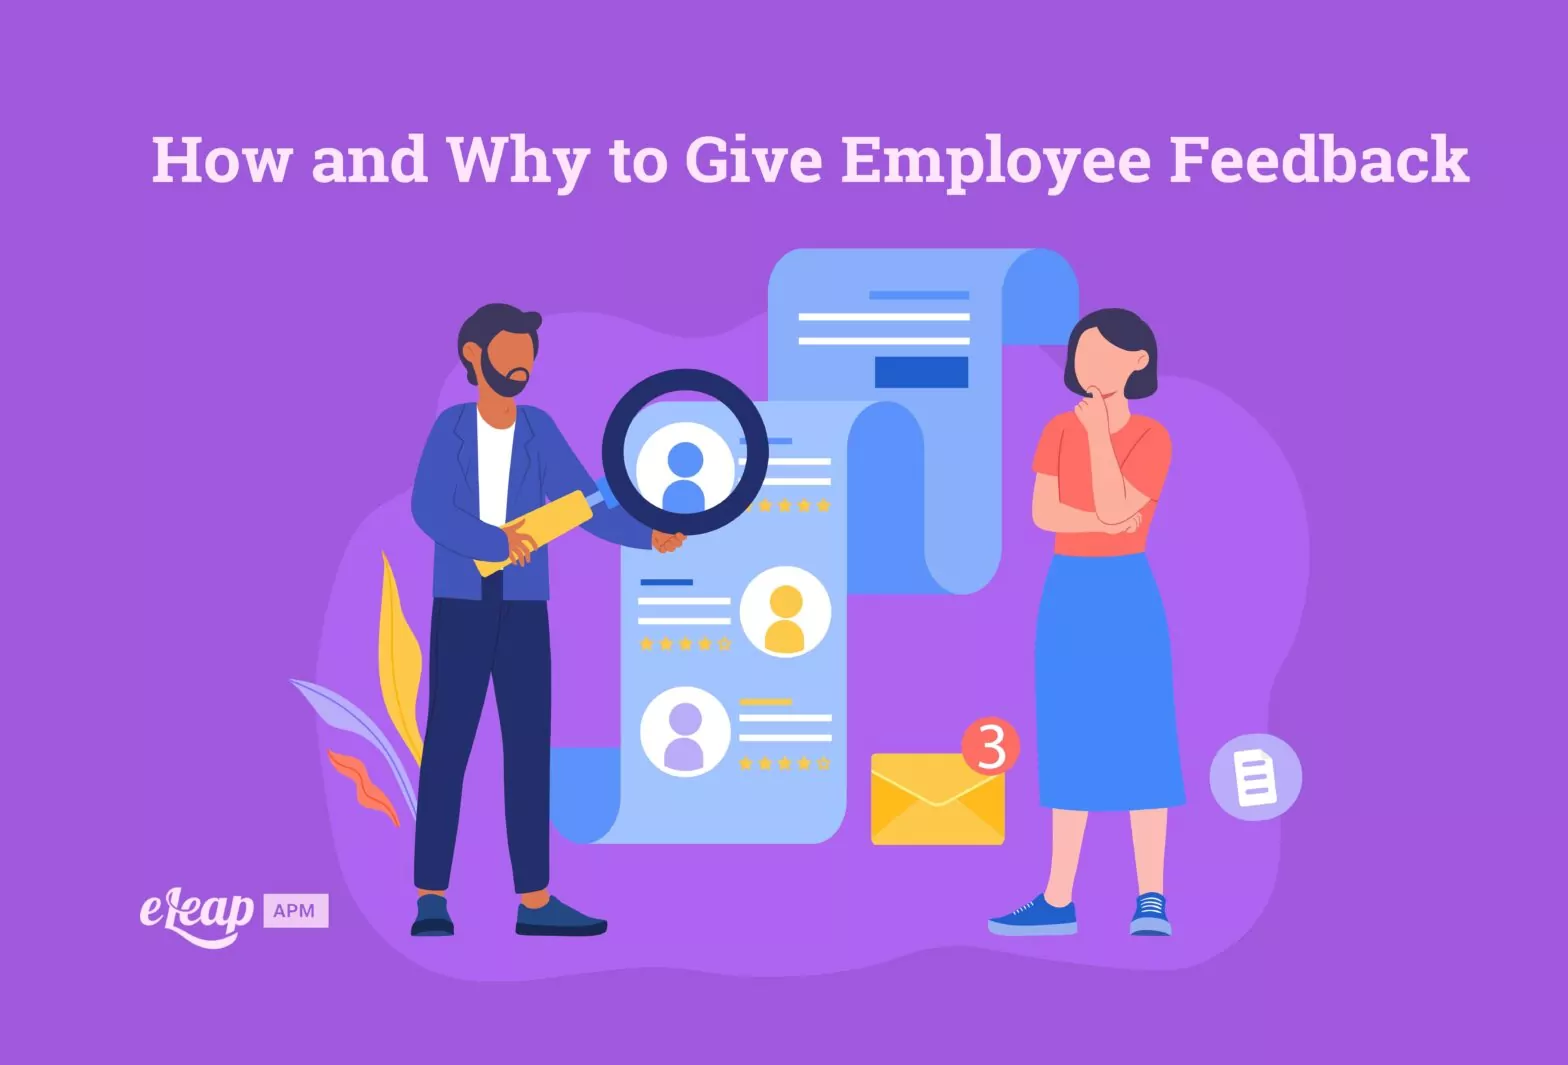 How and Why to Give Employee Feedback